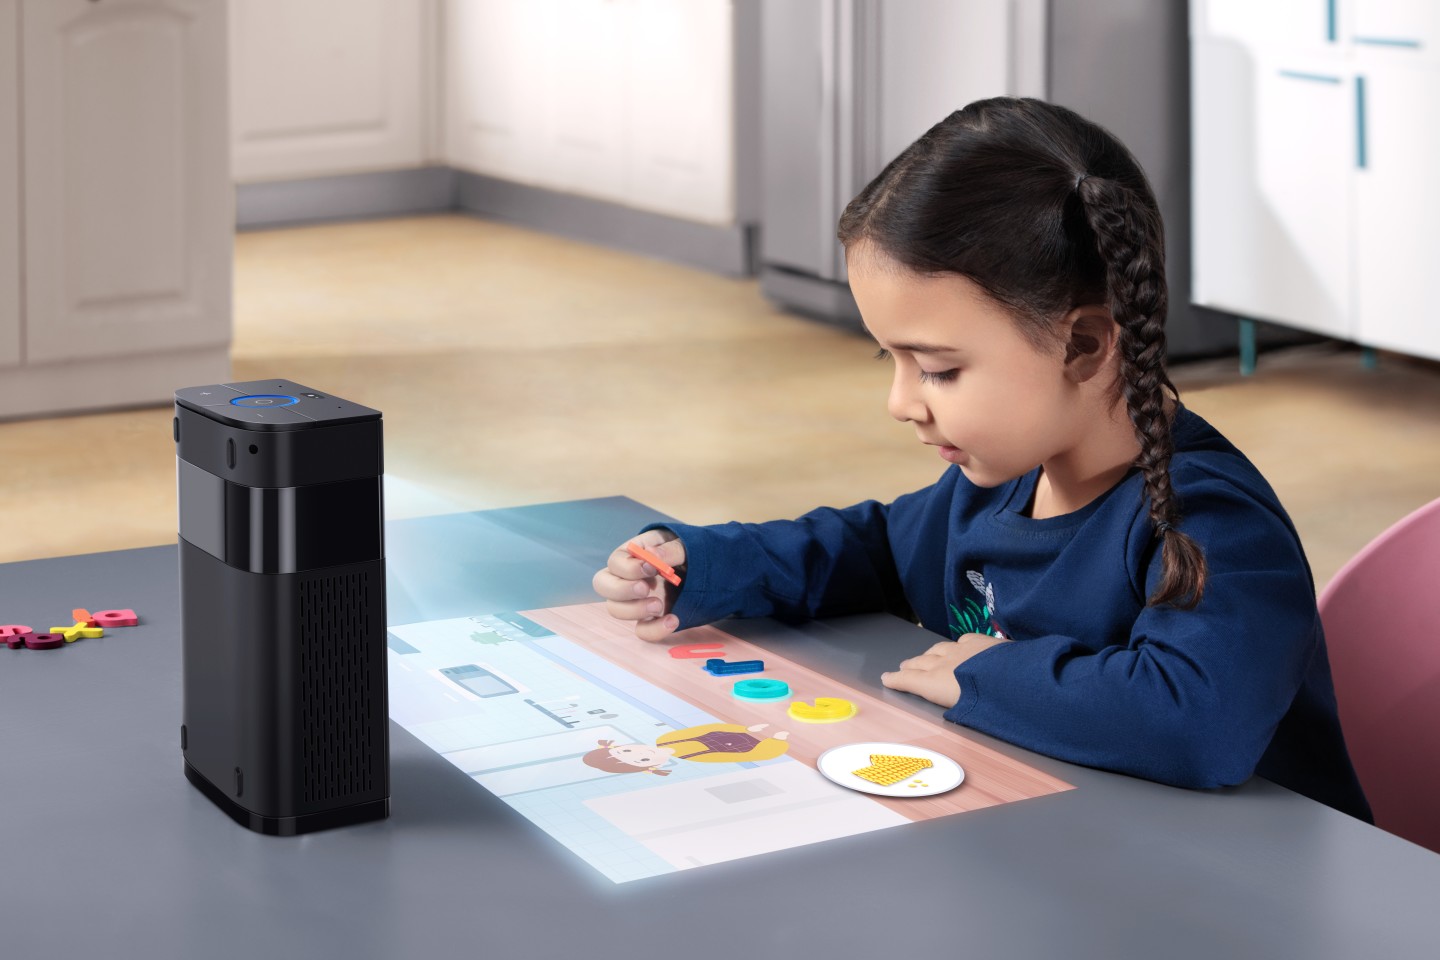 The M1 Pro can serve as an interactive education tool for the younguns